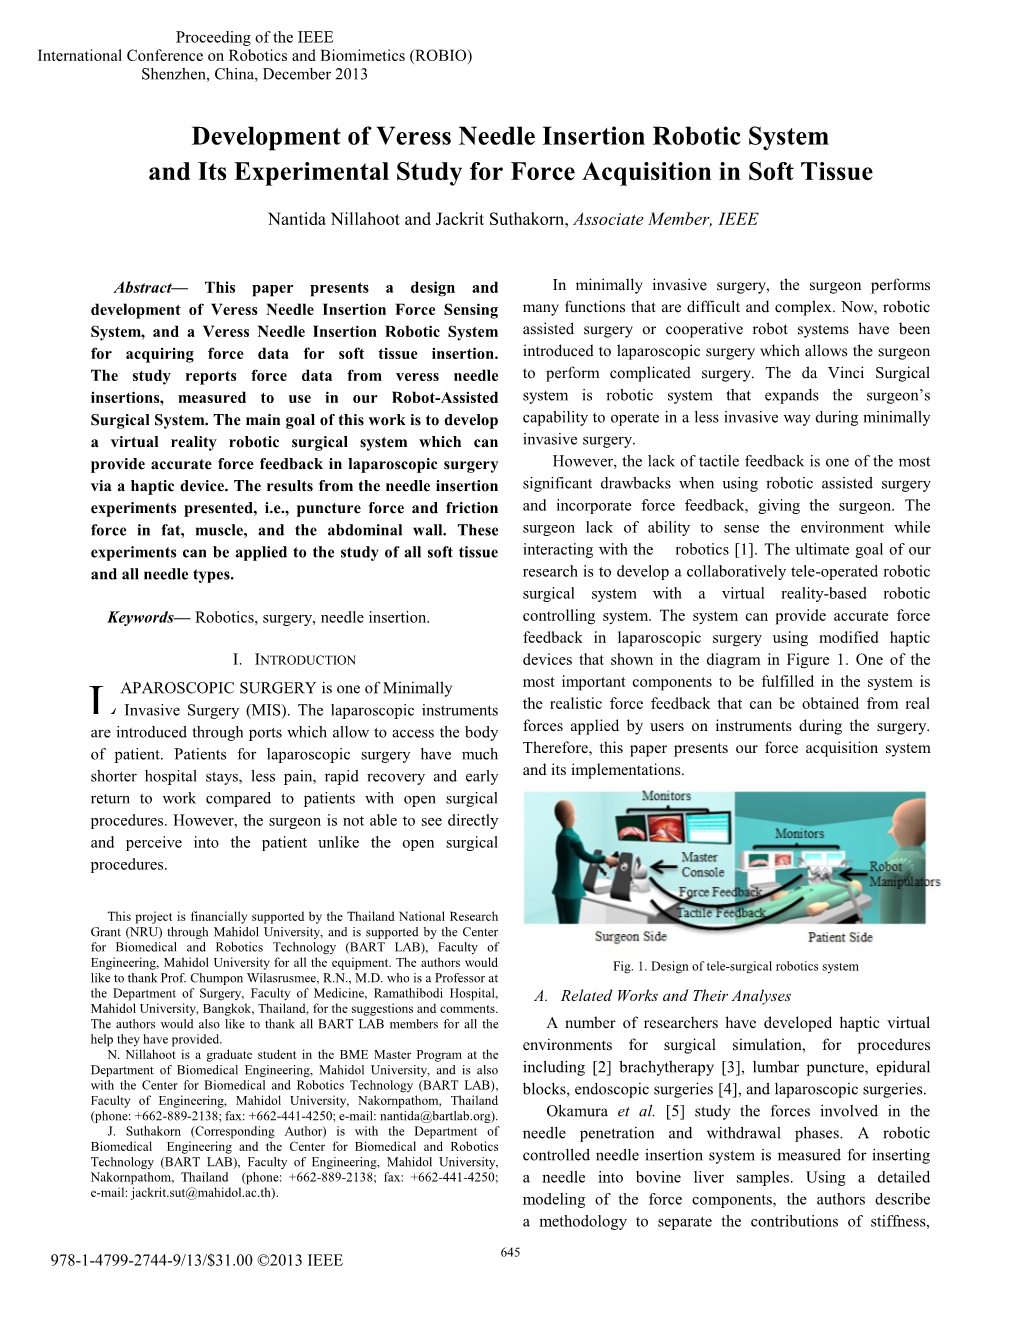 Development of Veress Needle Insertion Robotic System and Its Experimental Study for Force Acquisition in Soft Tissue